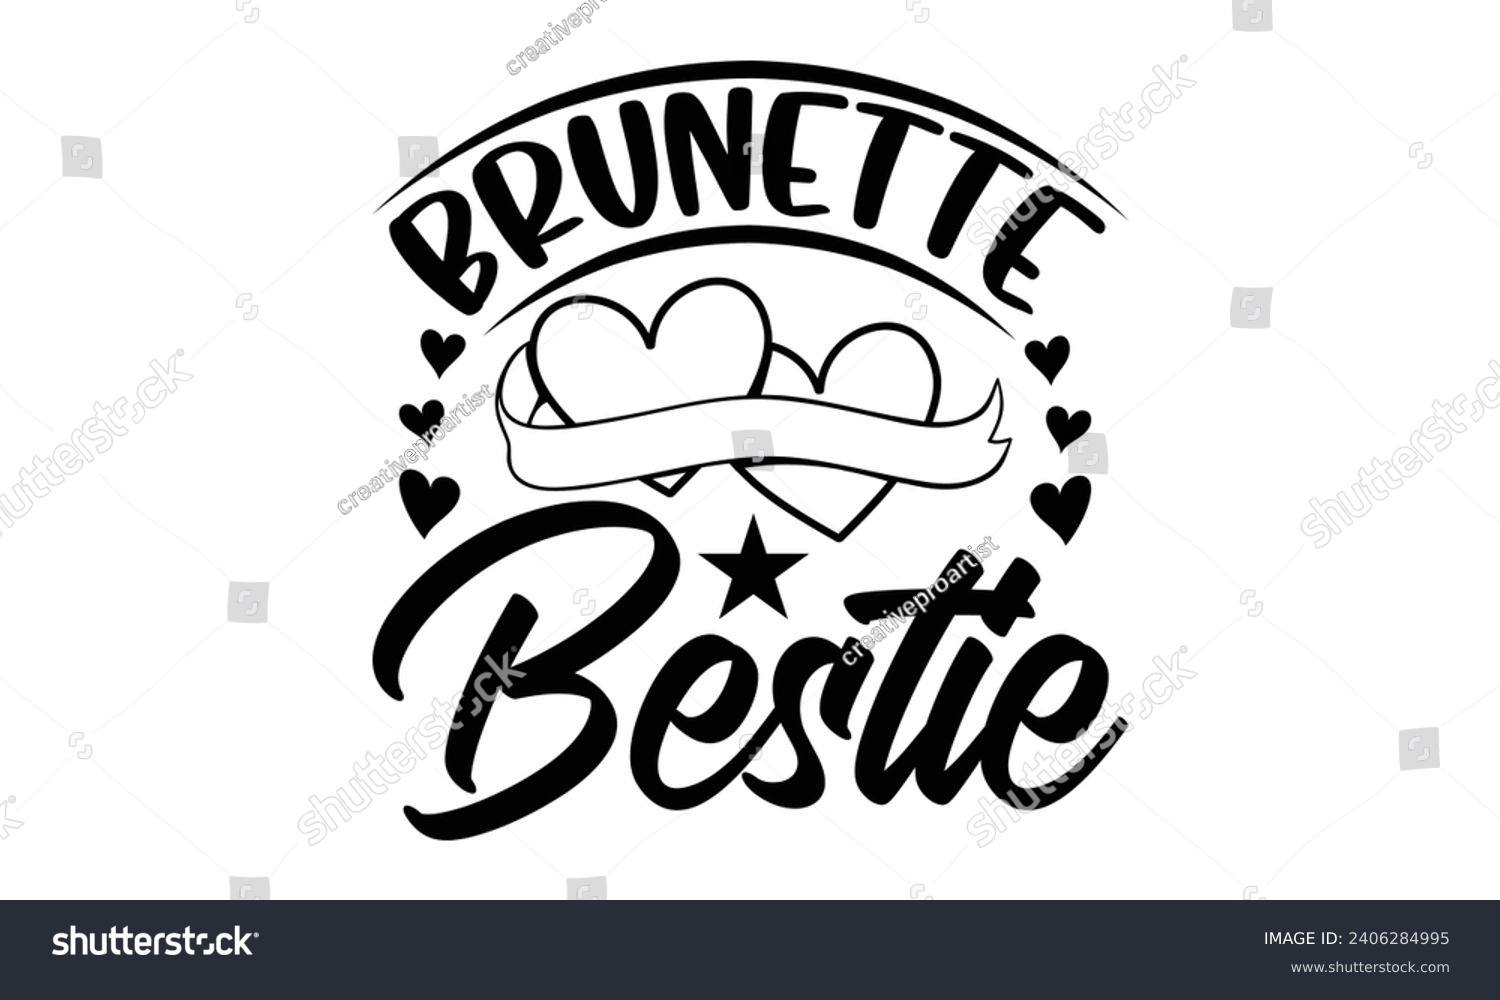 SVG of Brunette Bestie- Best friends t- shirt design, Hand drawn lettering phrase, Illustration for prints on bags, posters, cards eps, Files for Cutting, Isolated on white background. svg